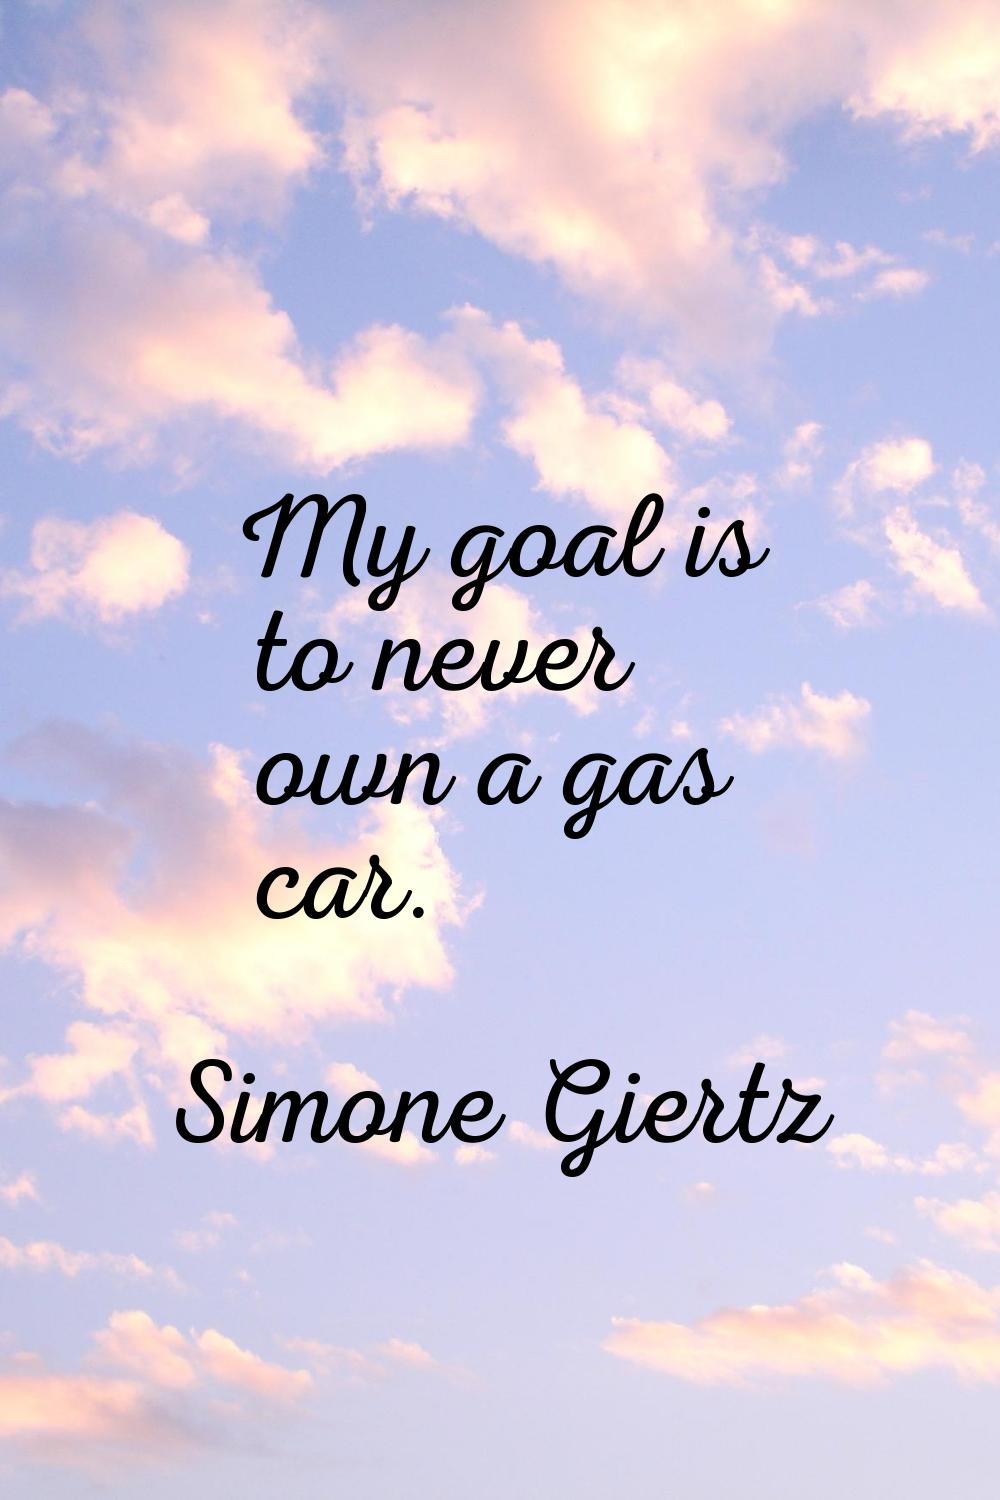 My goal is to never own a gas car.